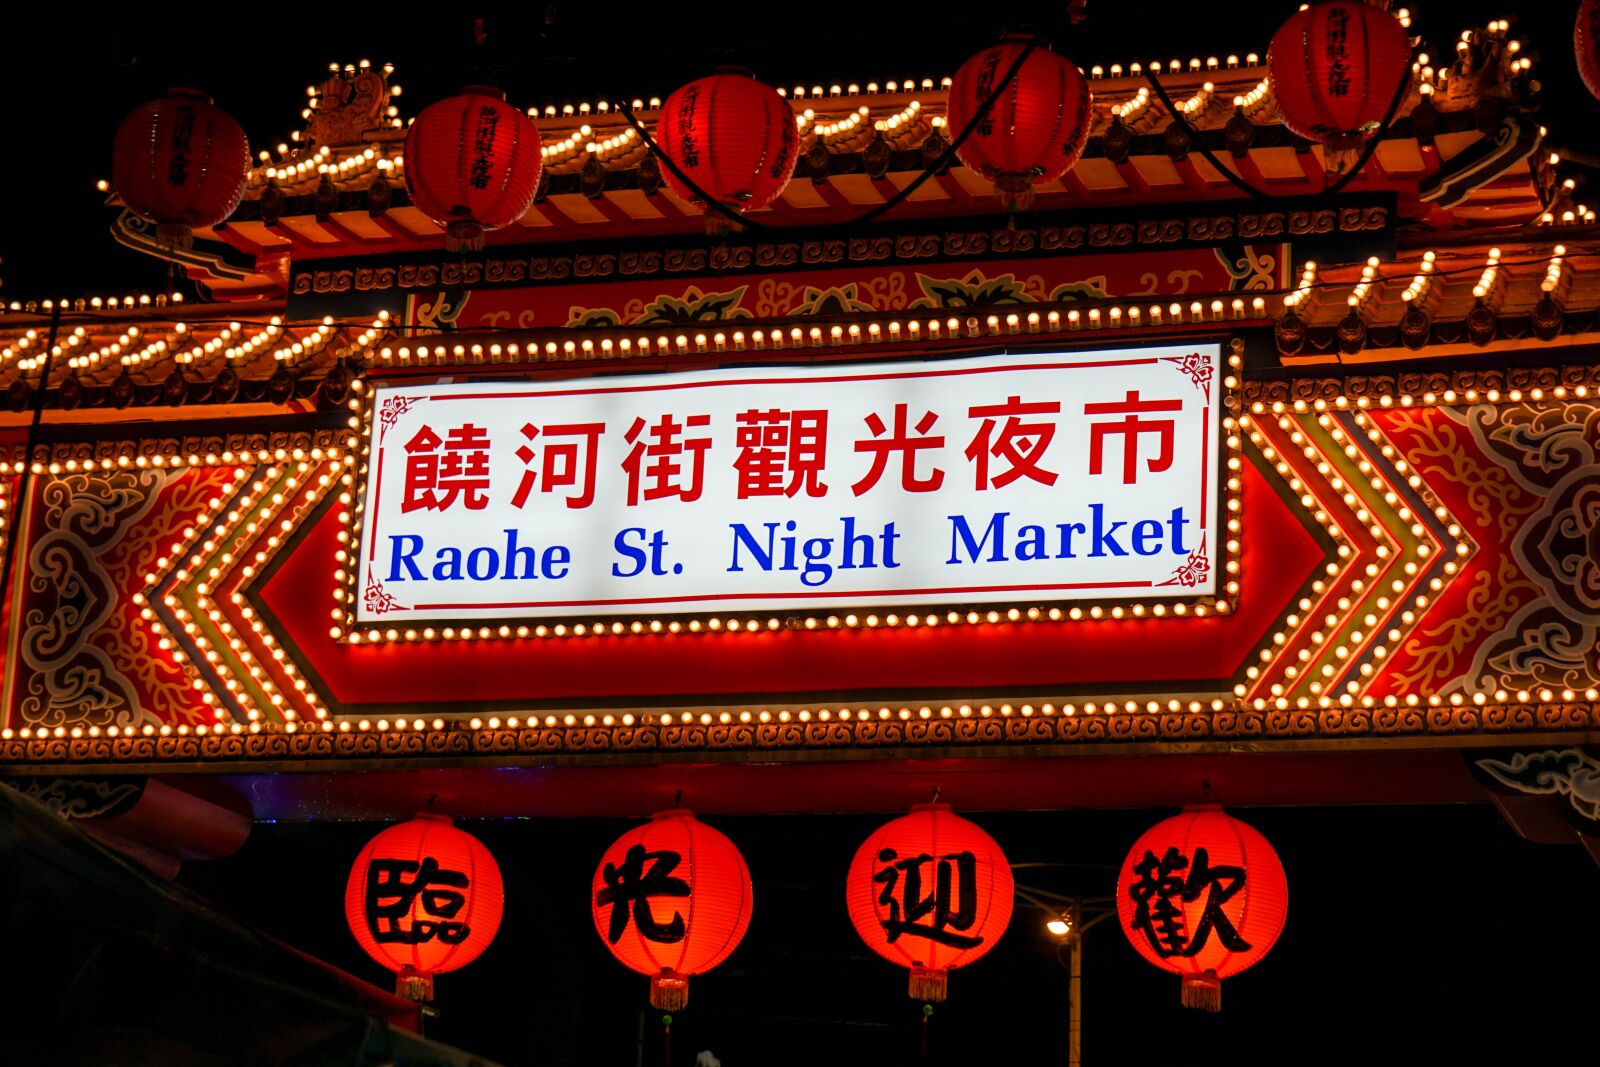 Sony a6000 sample photo. Food, night market, delicious photography